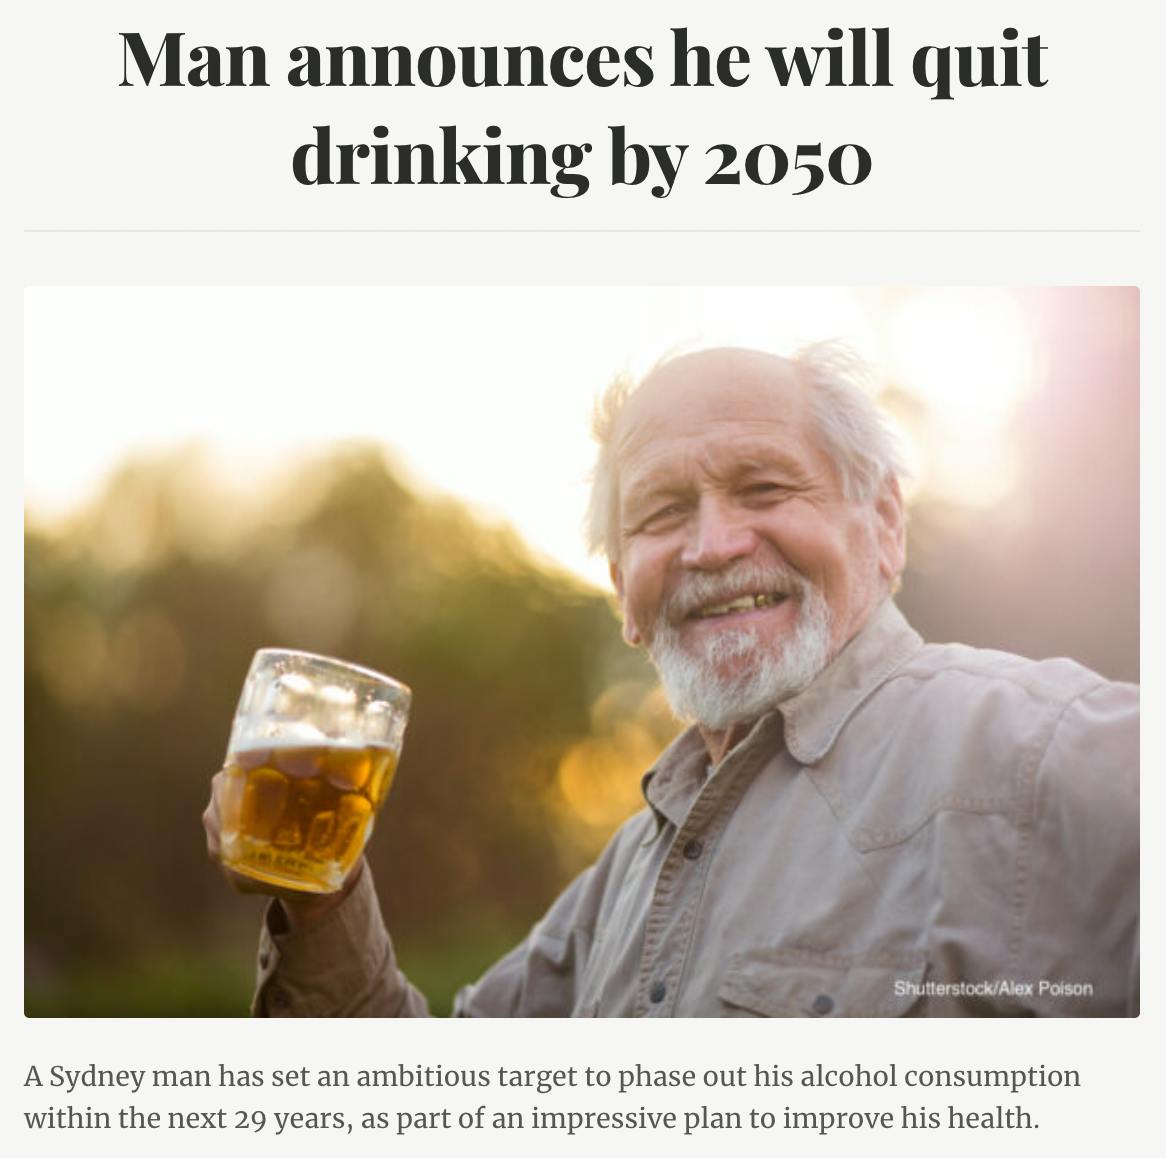 Man announces he will quit drinking by 2050